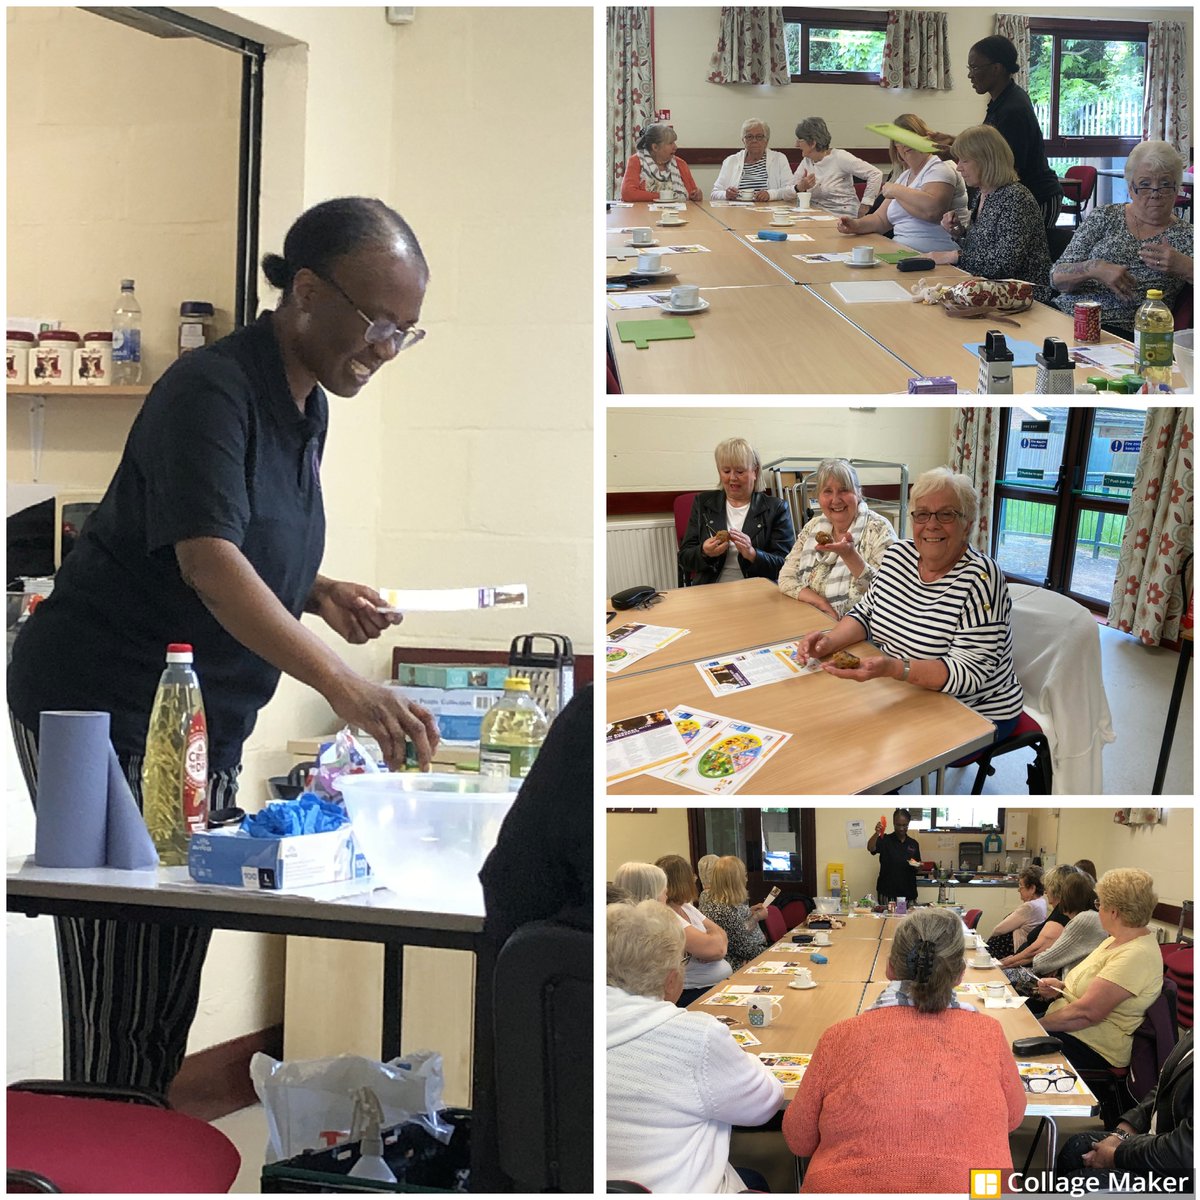 Our Wellbeing Group were delighted to welcome Kathleen & Jasmine from Grow!Cook!Eat! last week. Everyone learned more about #healthyeating & participated in preparing (& eating) bean burgers with basil dressing😋
(Photos shared with consent)
#connectingwithothers #tryingnewthings